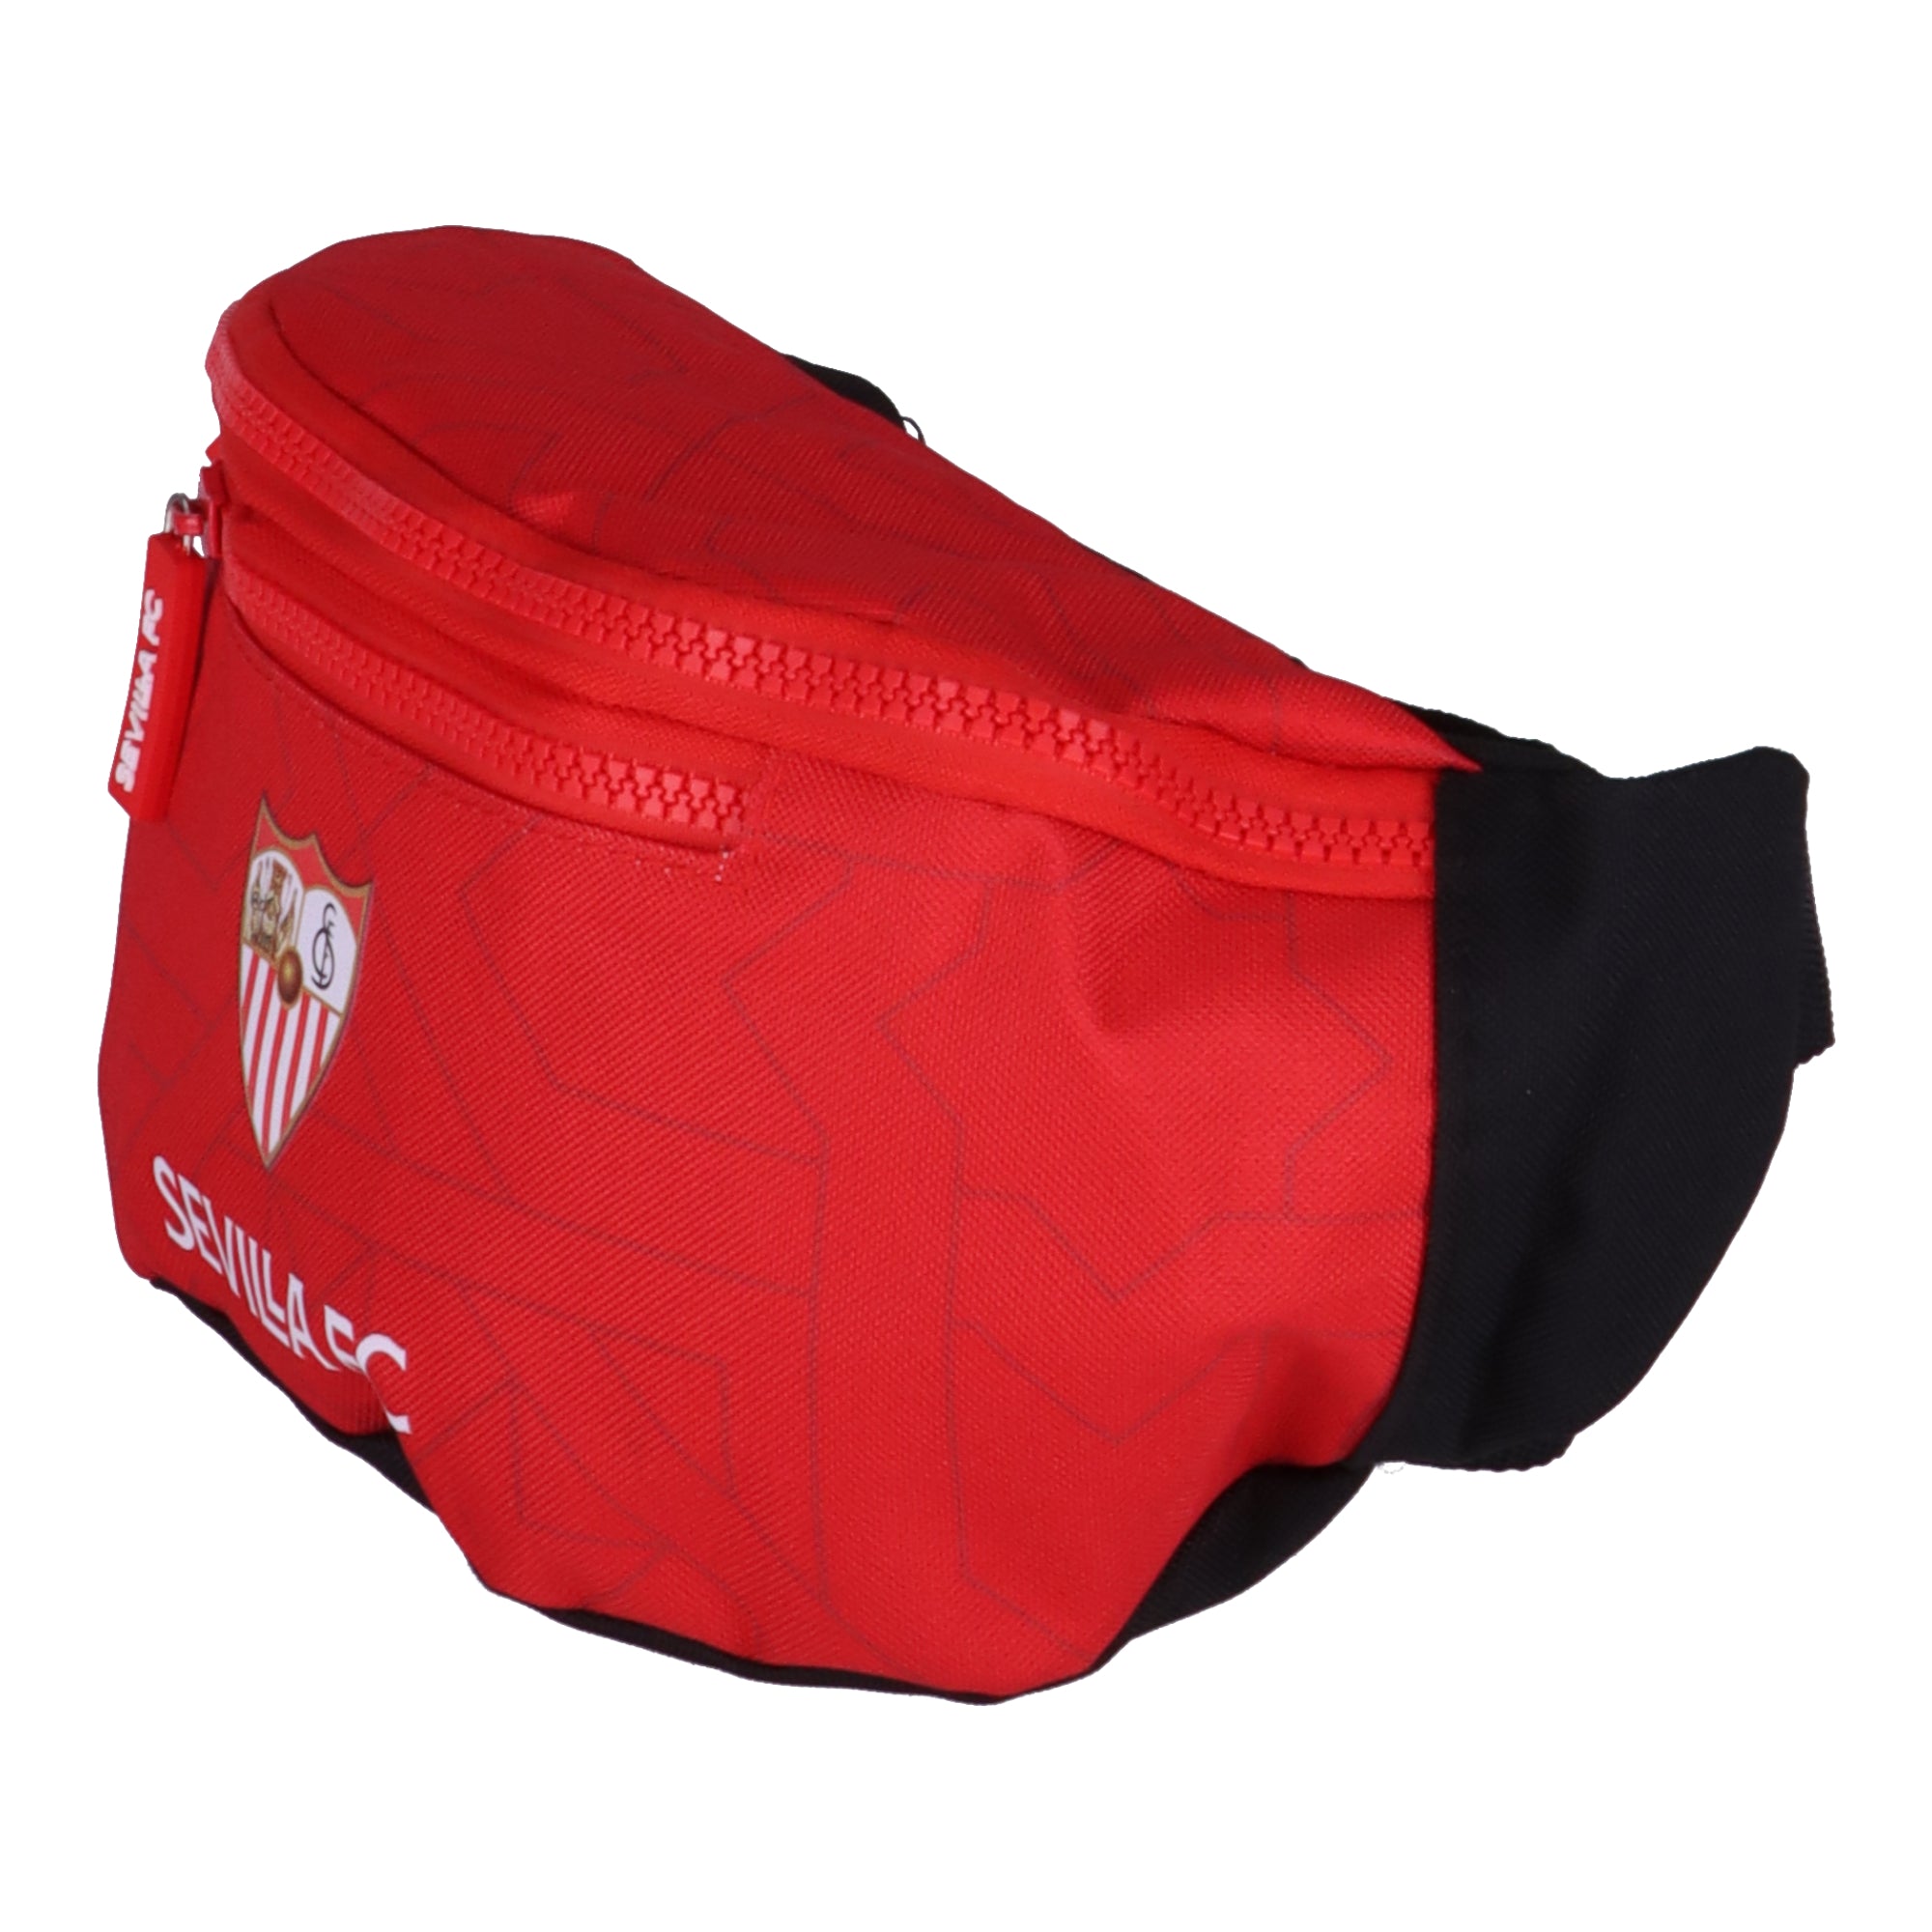 Red and black bum bag 23/24